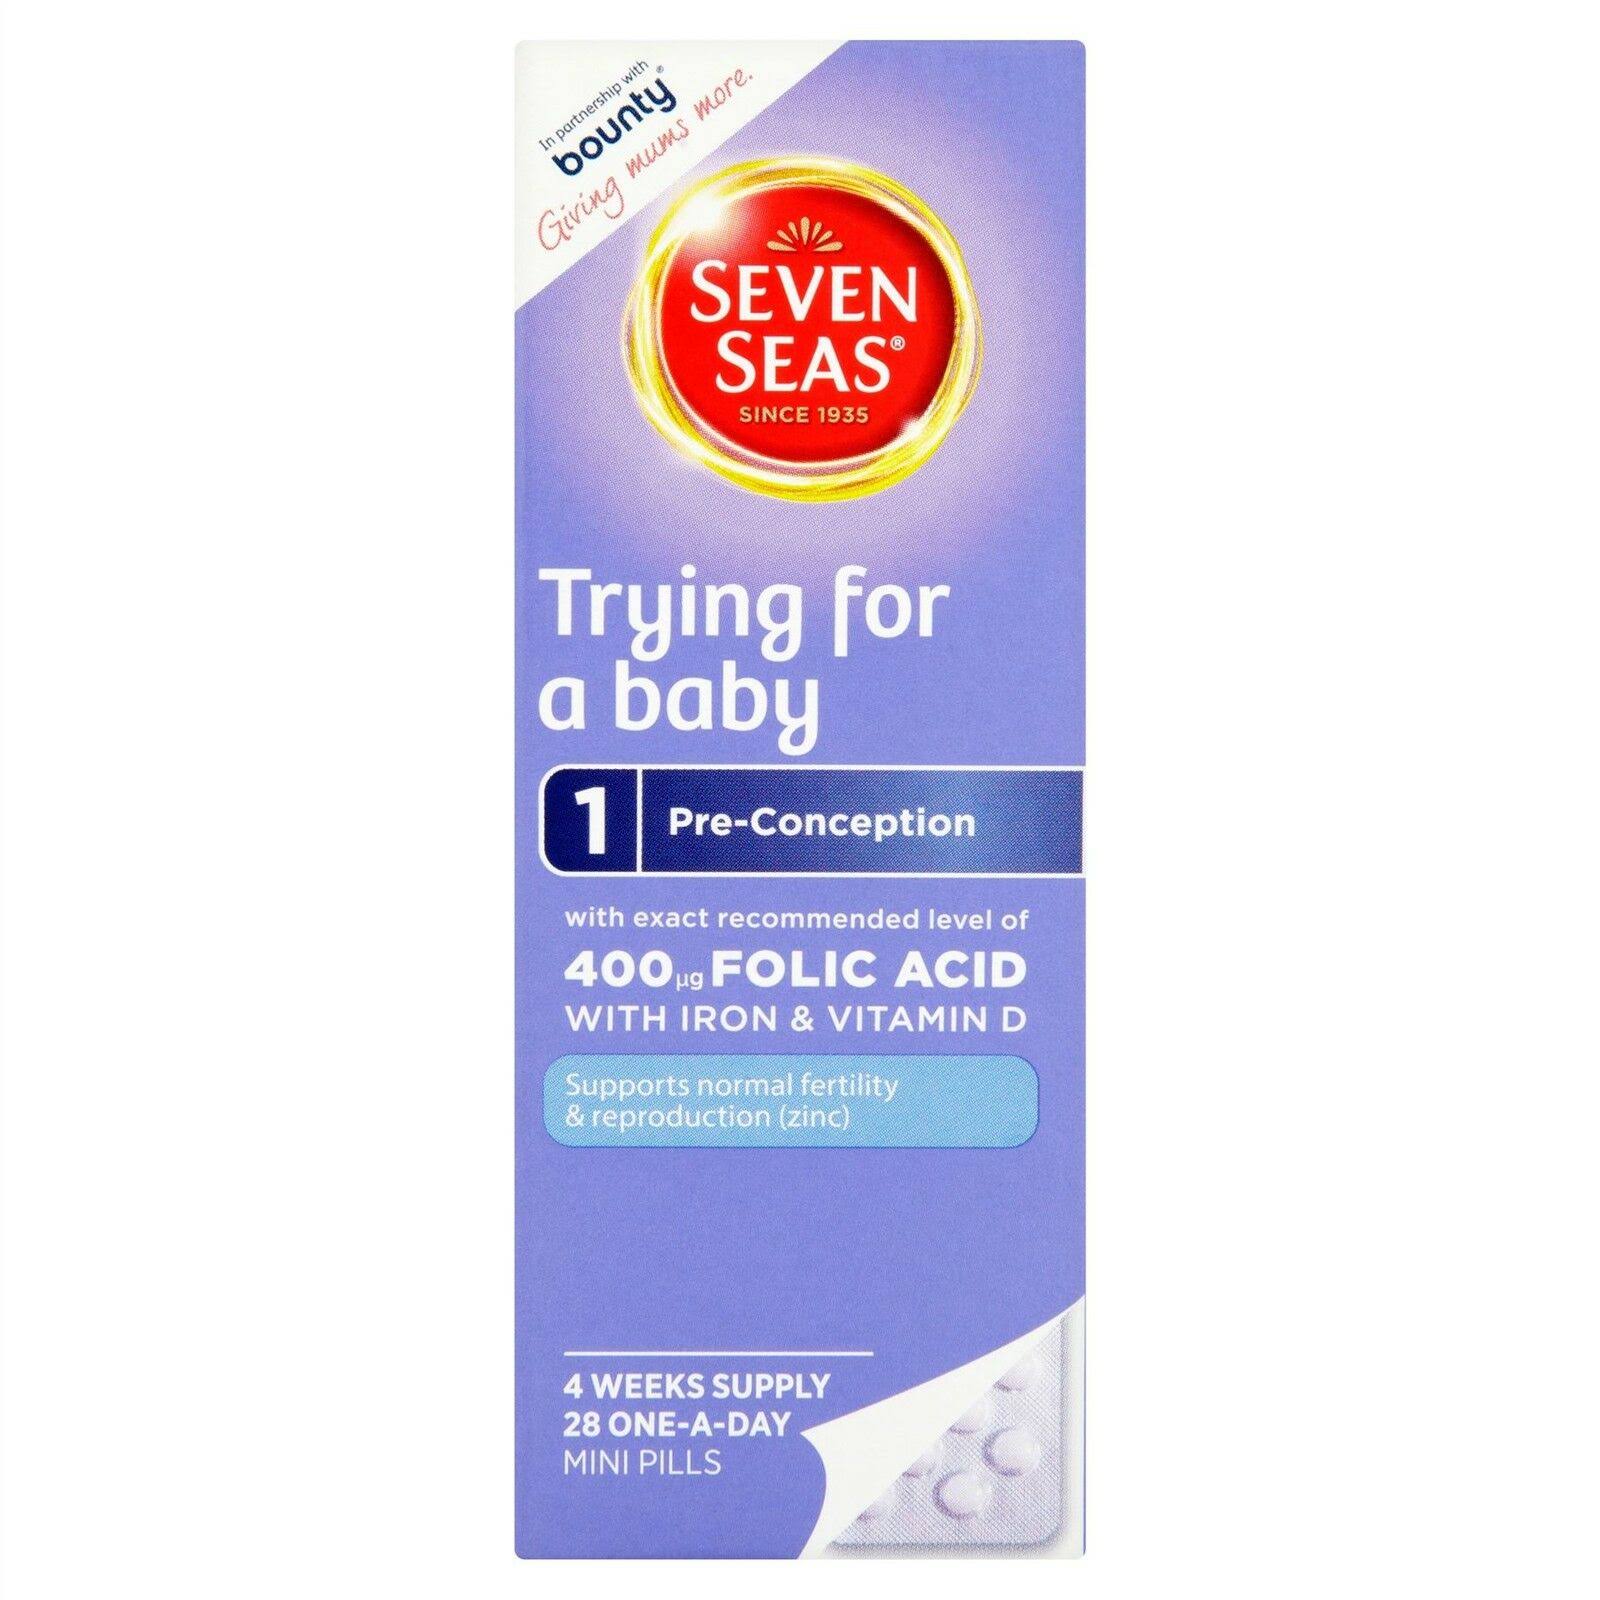 Seven Seas Trying for a Baby 1 Pre-Conception Mini Pills - 28 Pack